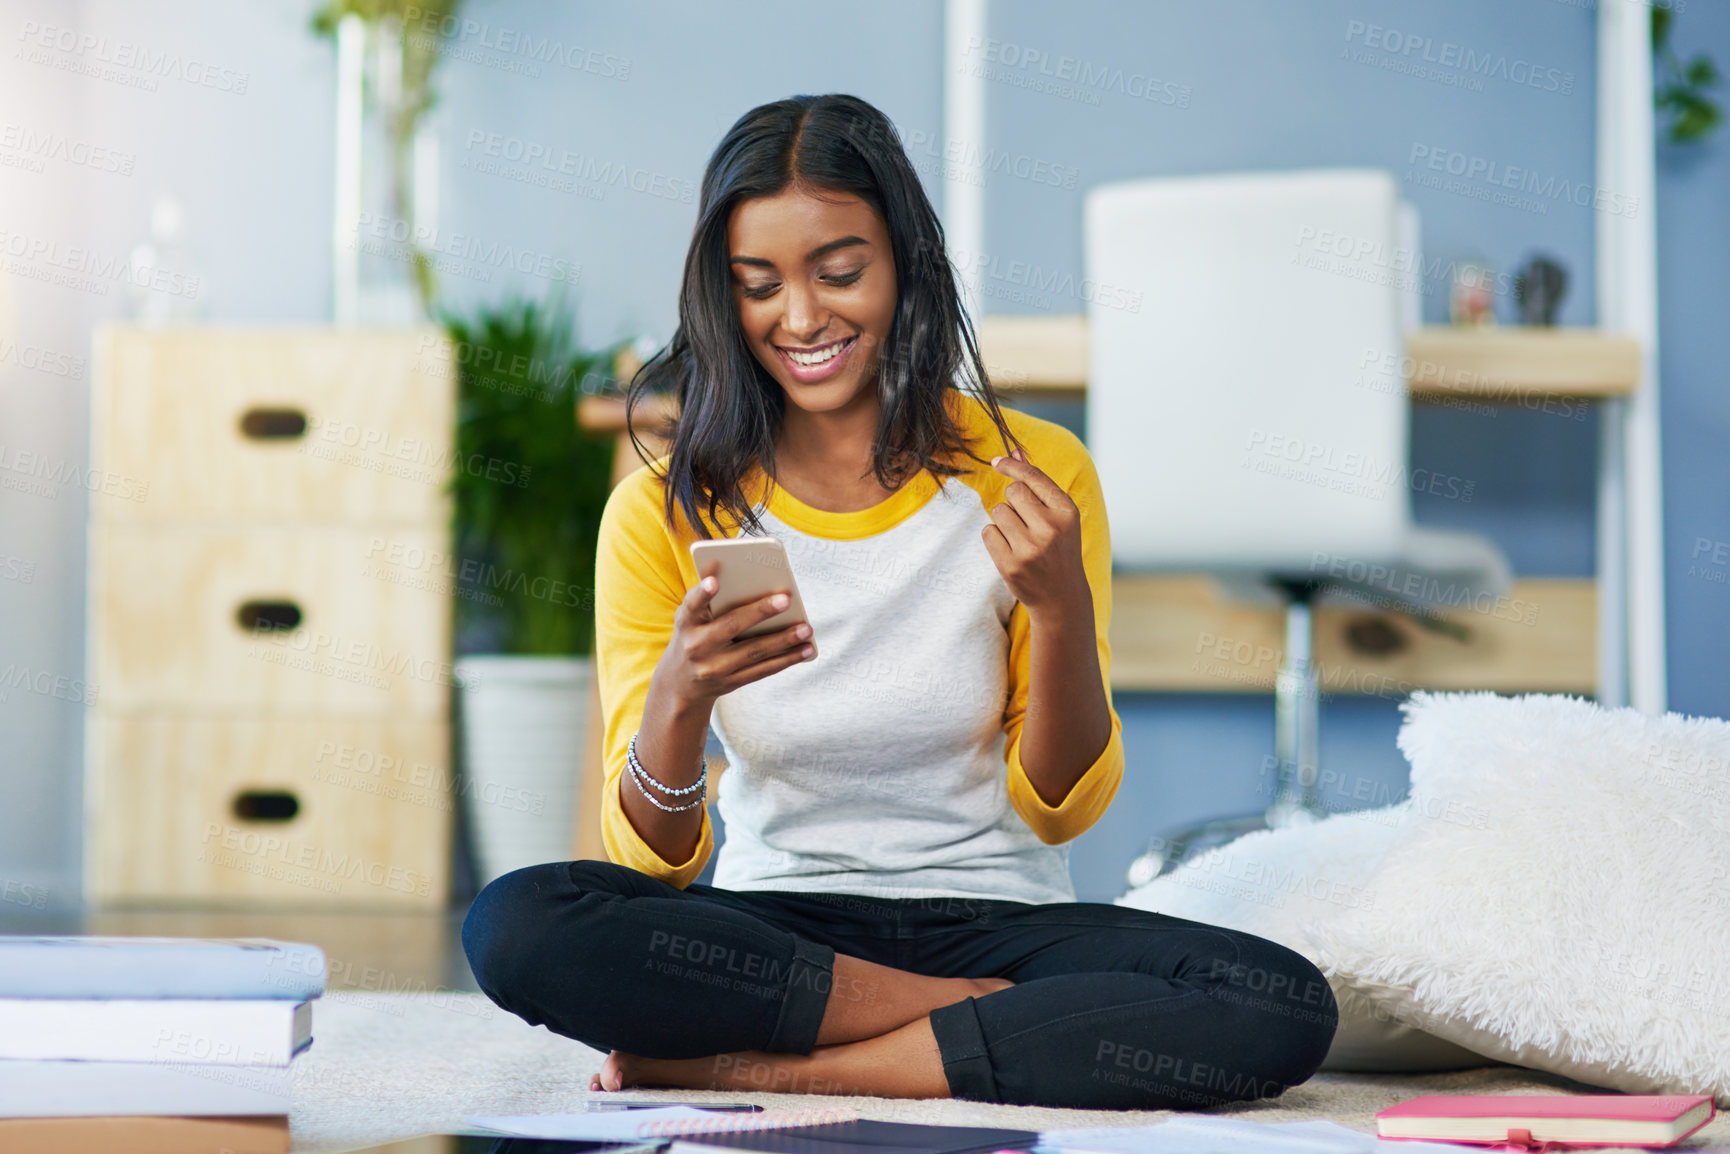 Buy stock photo Home floor, cellphone and happy woman, student or girl typing, texting and search online, internet or website info. App, studying and person relax, message and social media user scroll on phone UI 